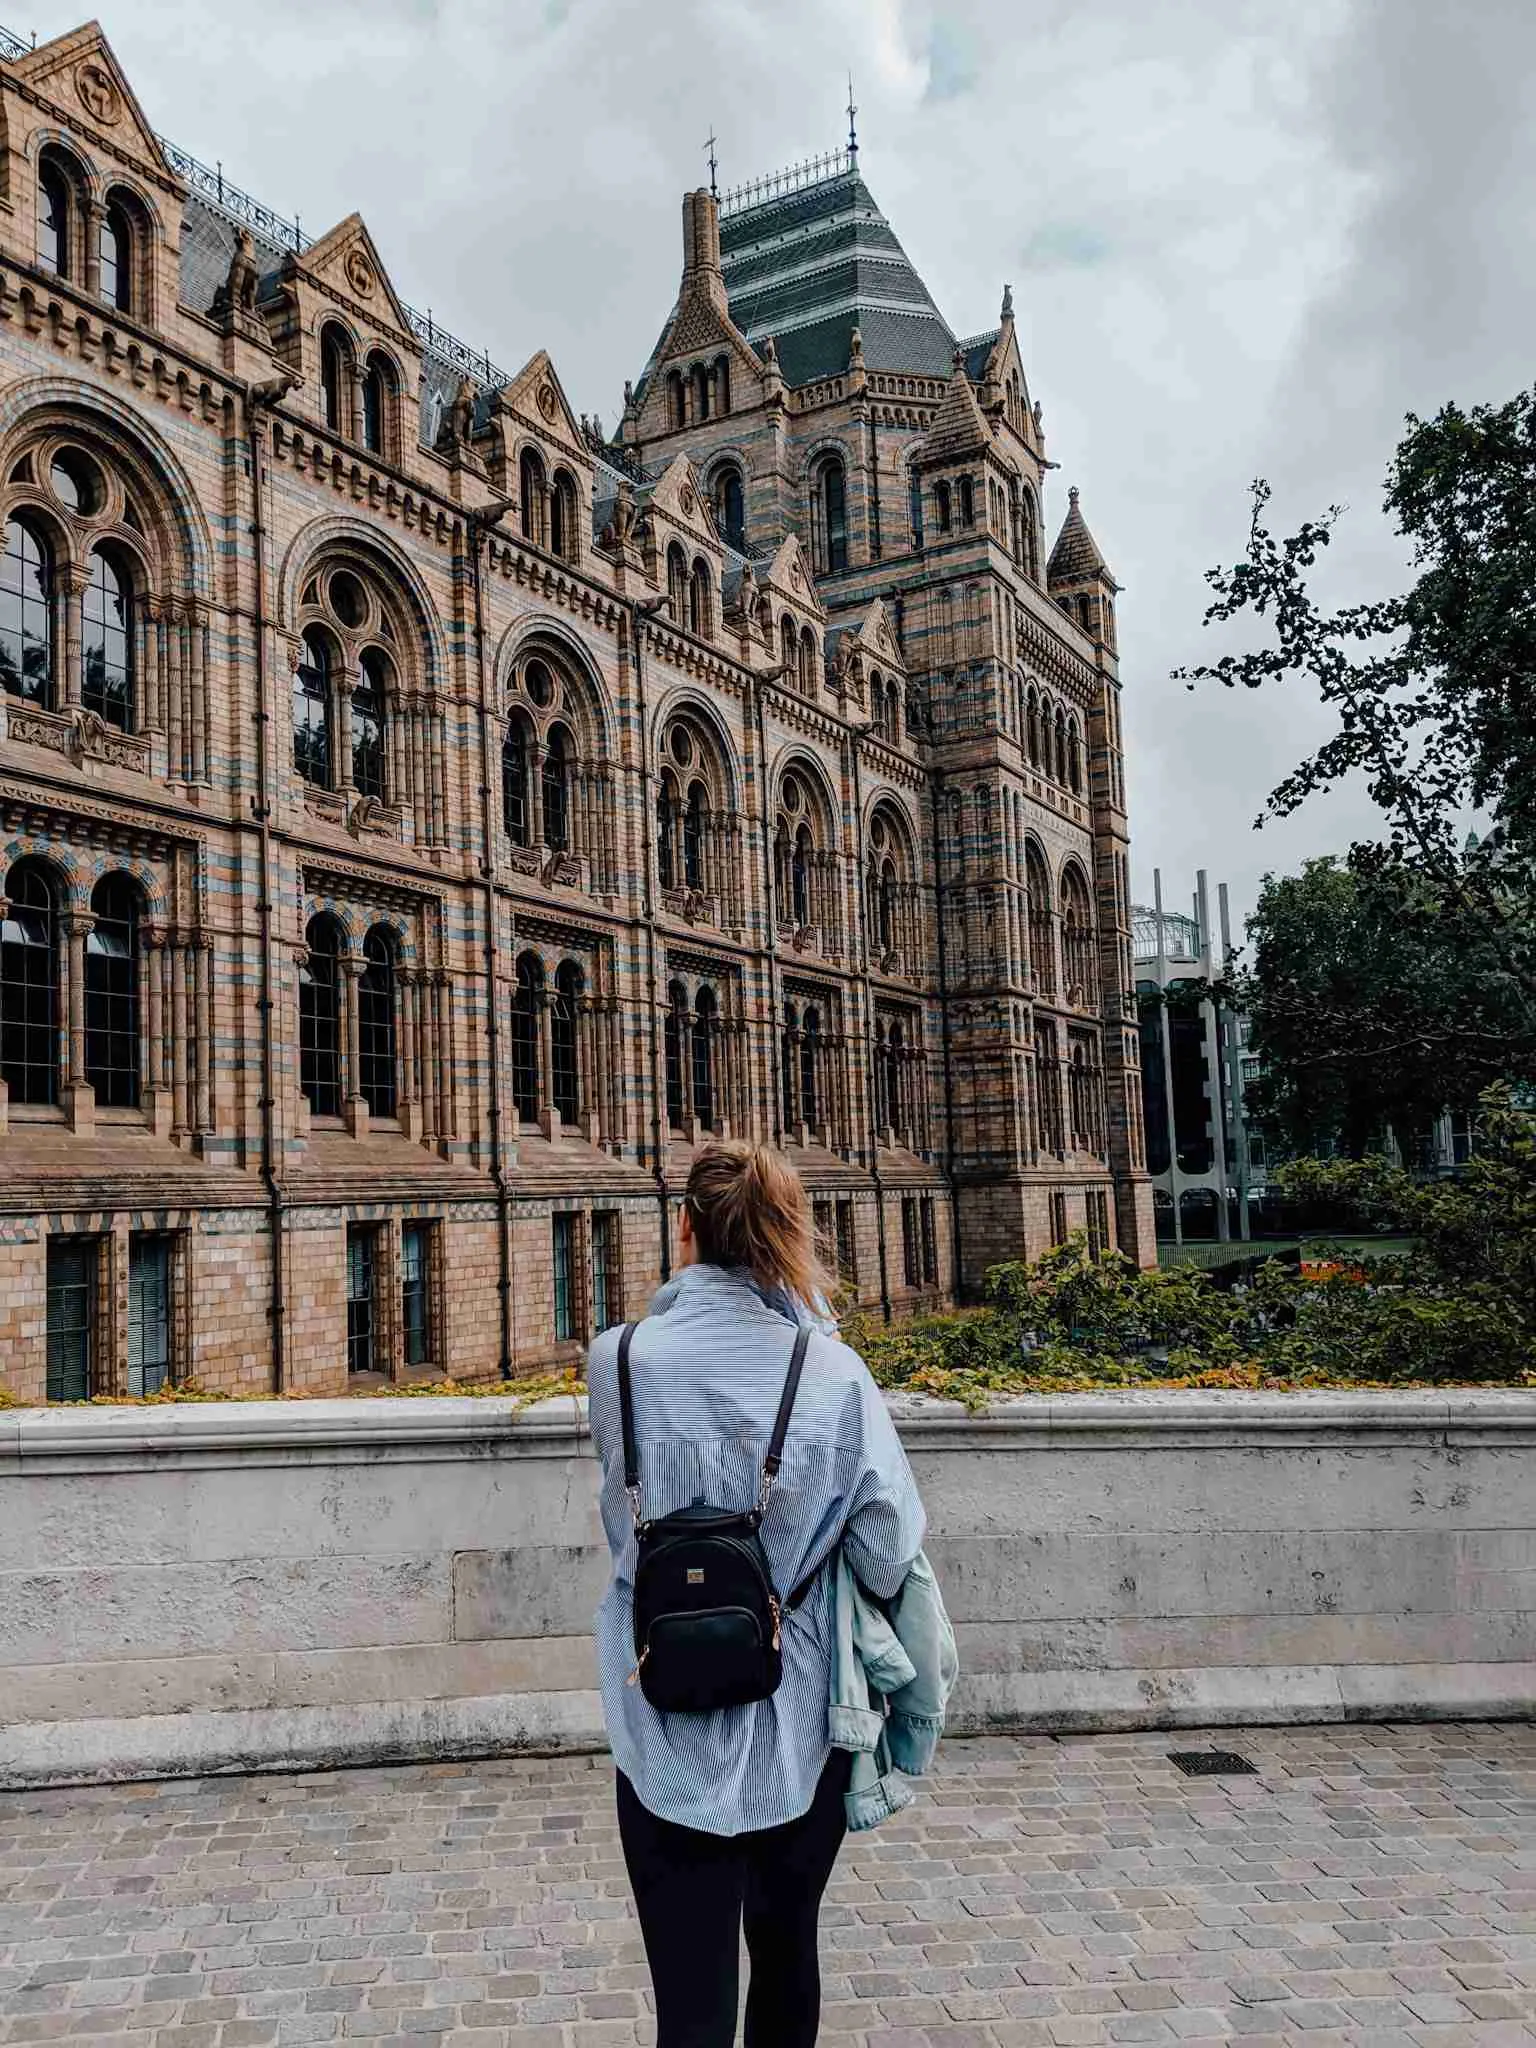 A girl walking towards the exterior of the Natural History Museum in London - one of London's museums. 